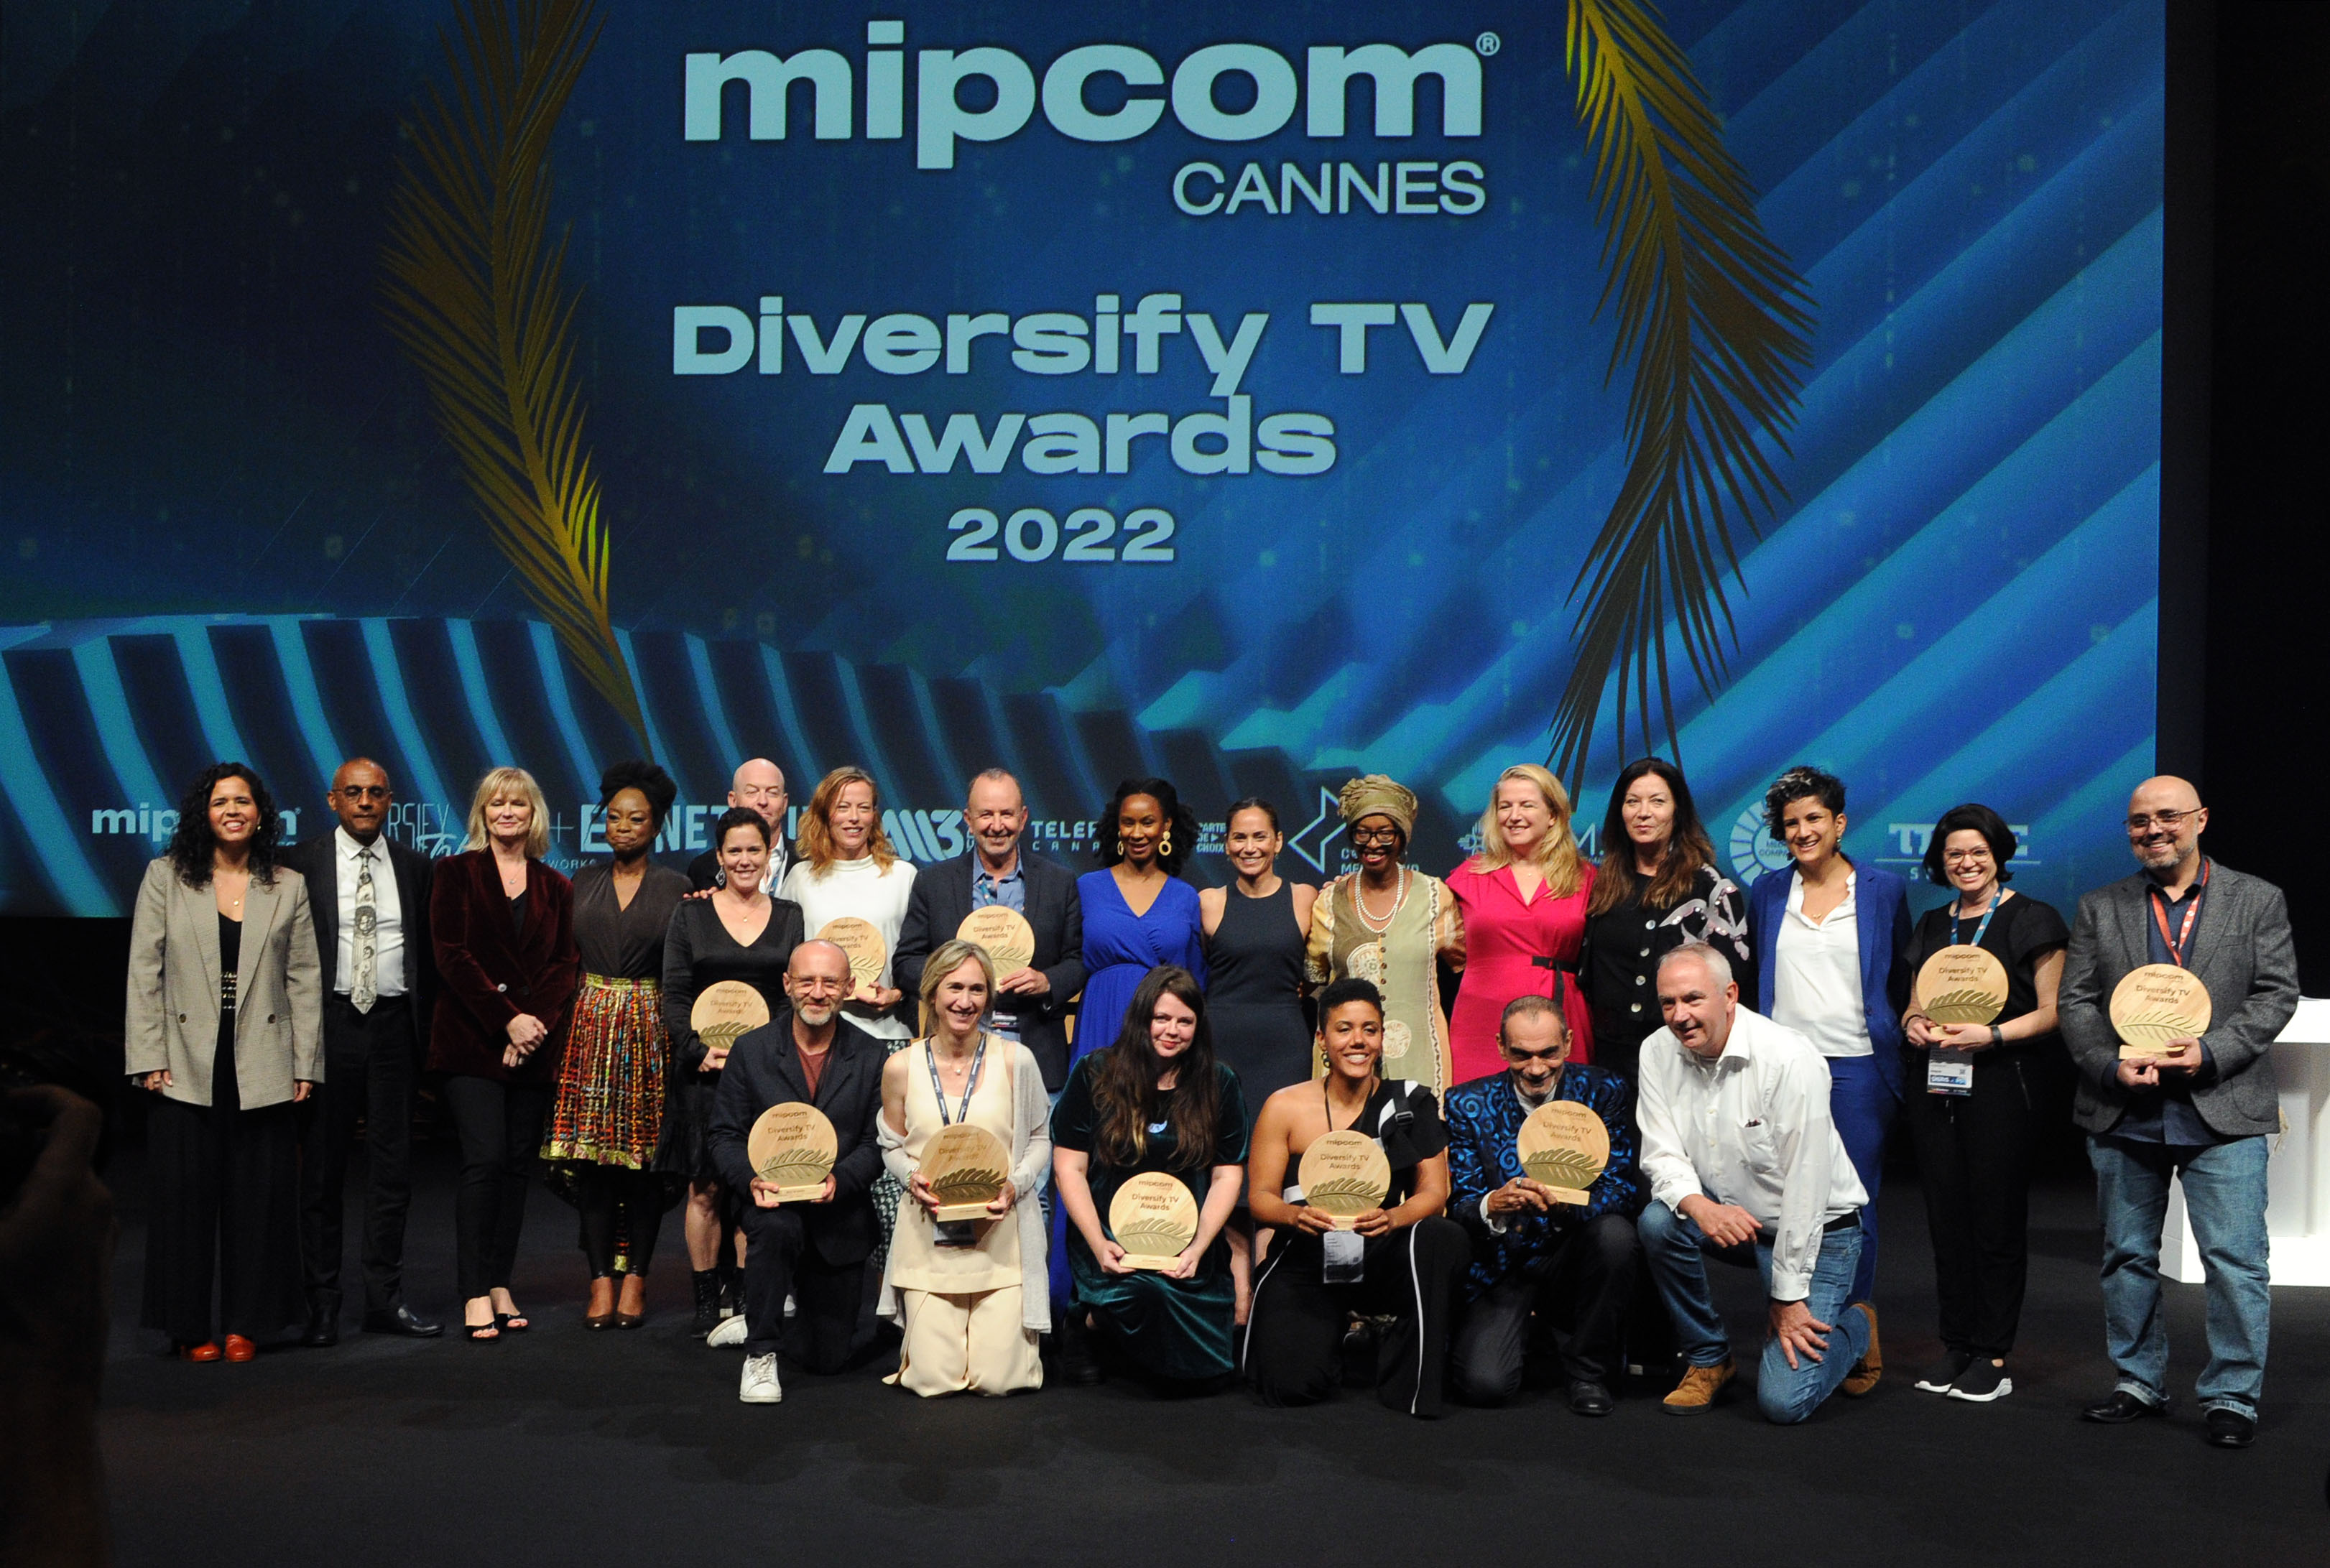 The 6th MIPCOM CANNES Diversify TV Awards Winners